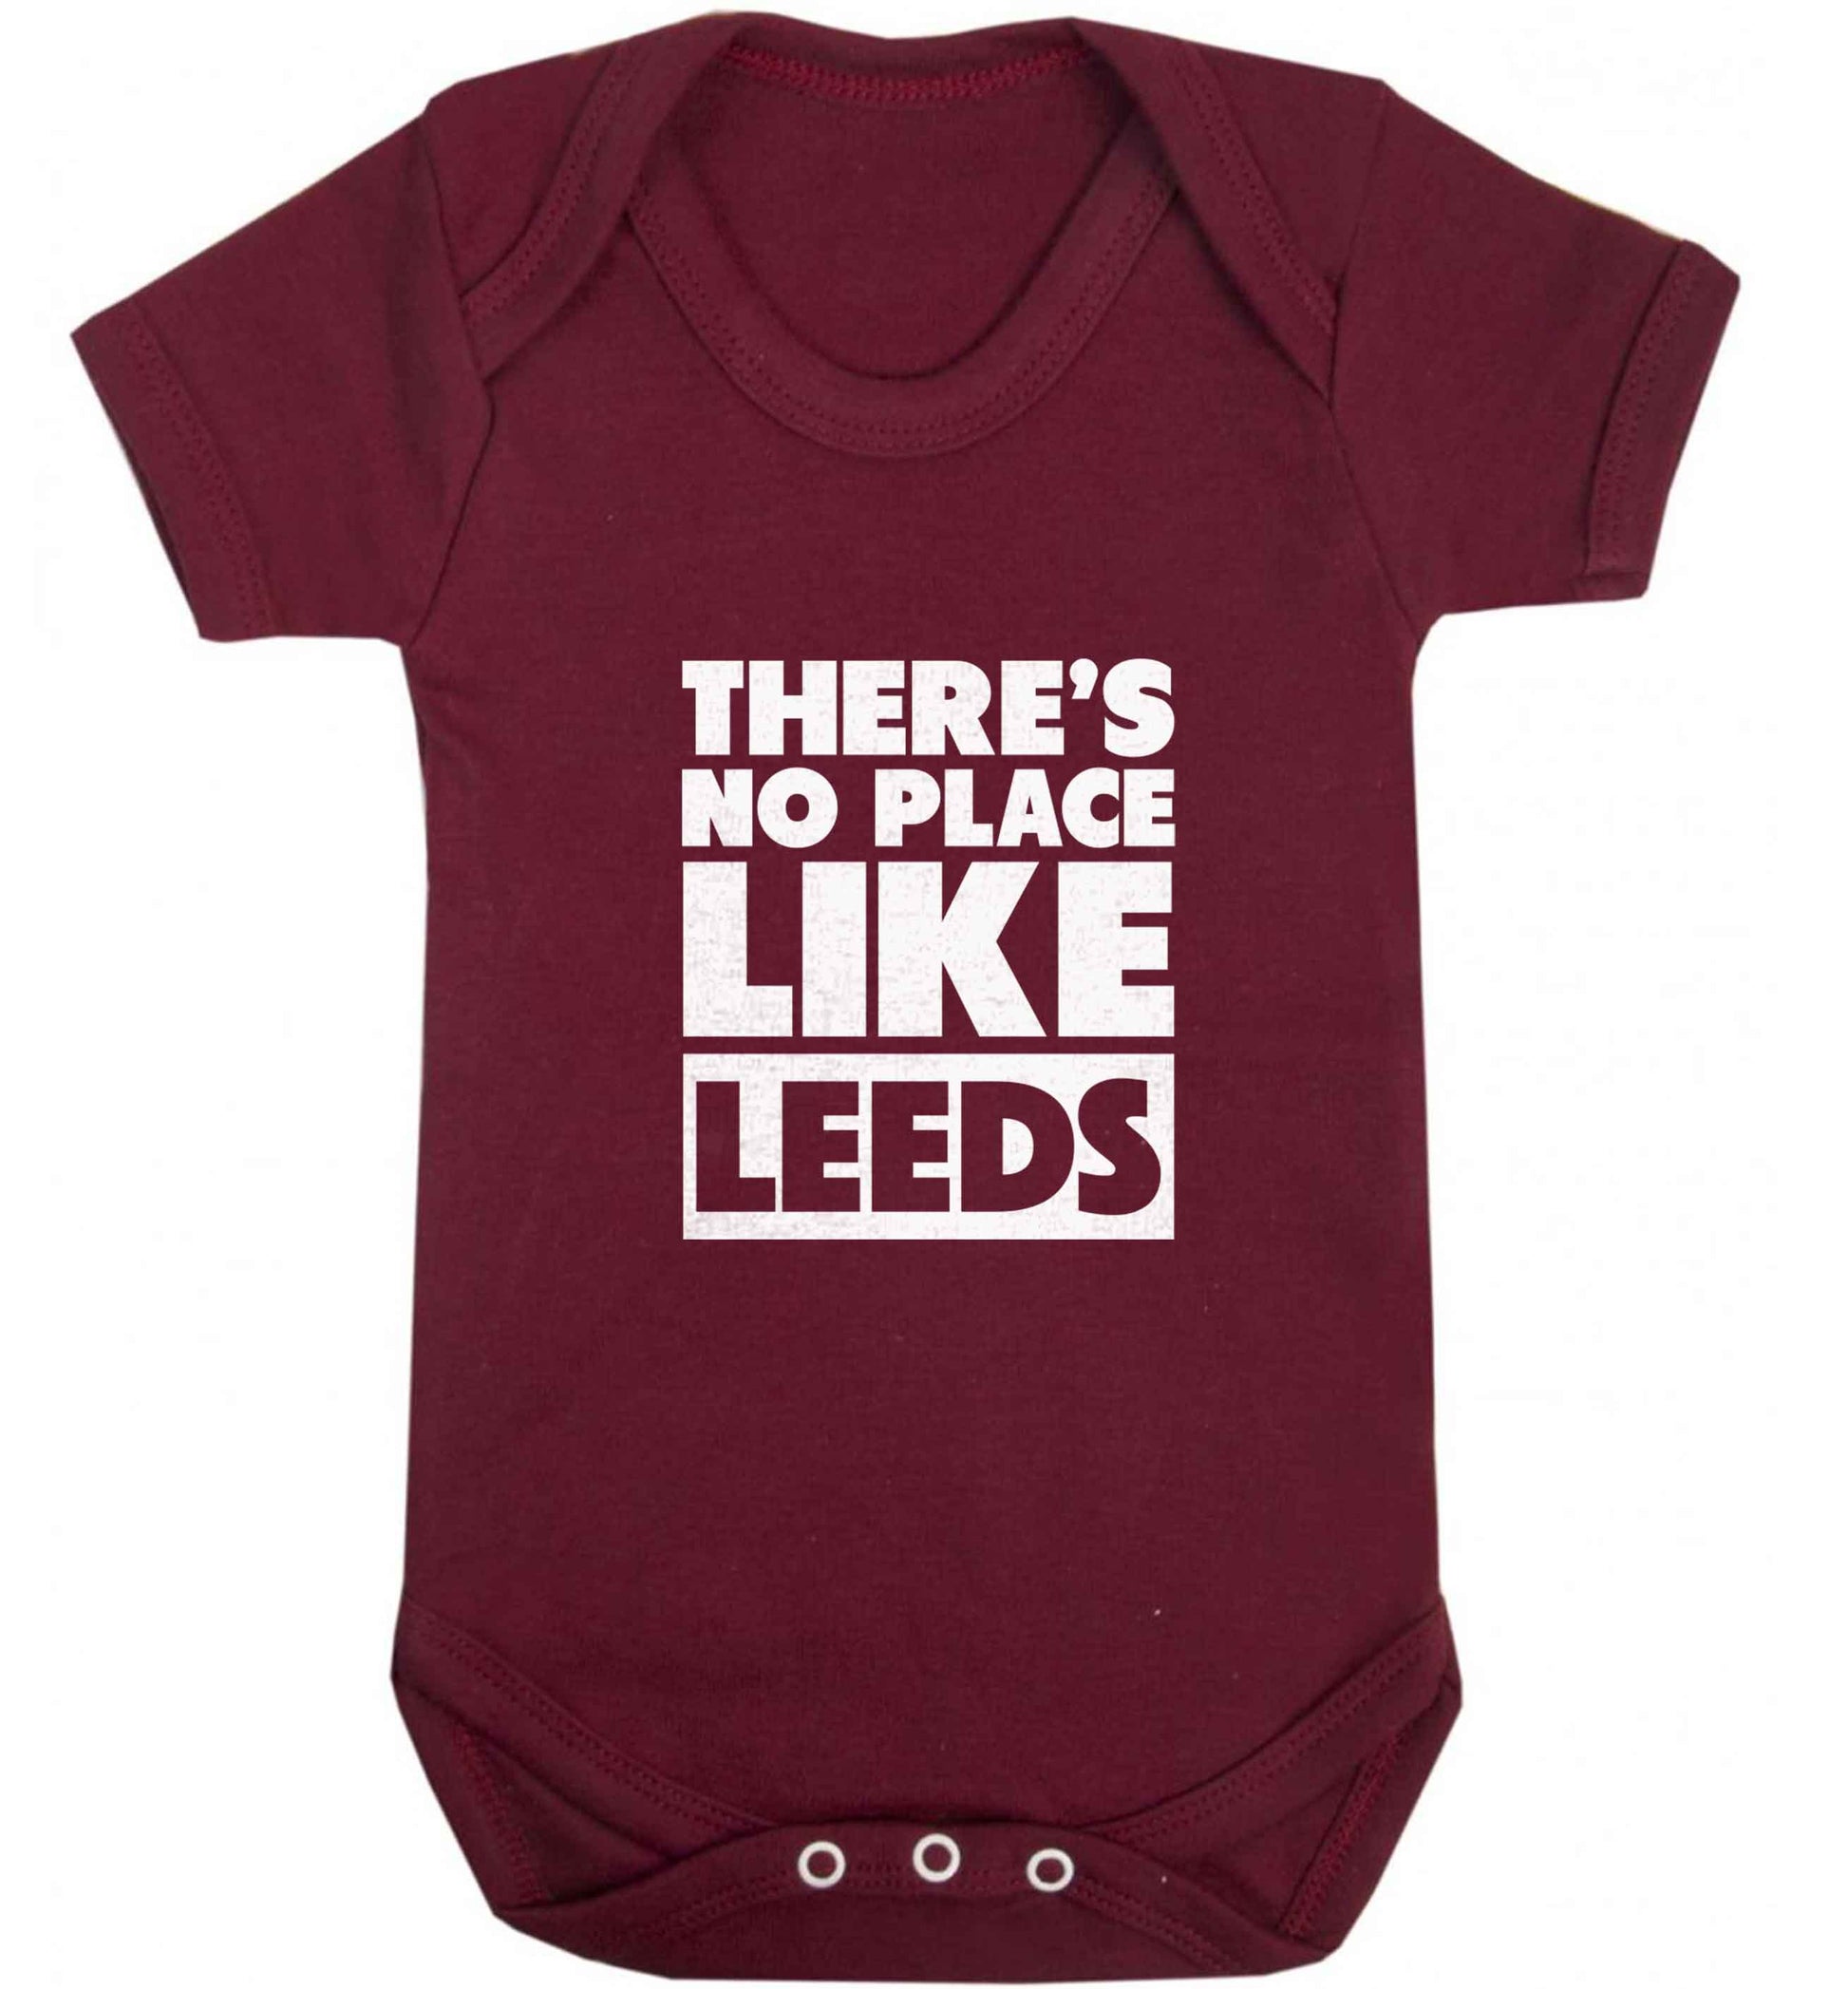 There's no place like Leeds baby vest maroon 18-24 months